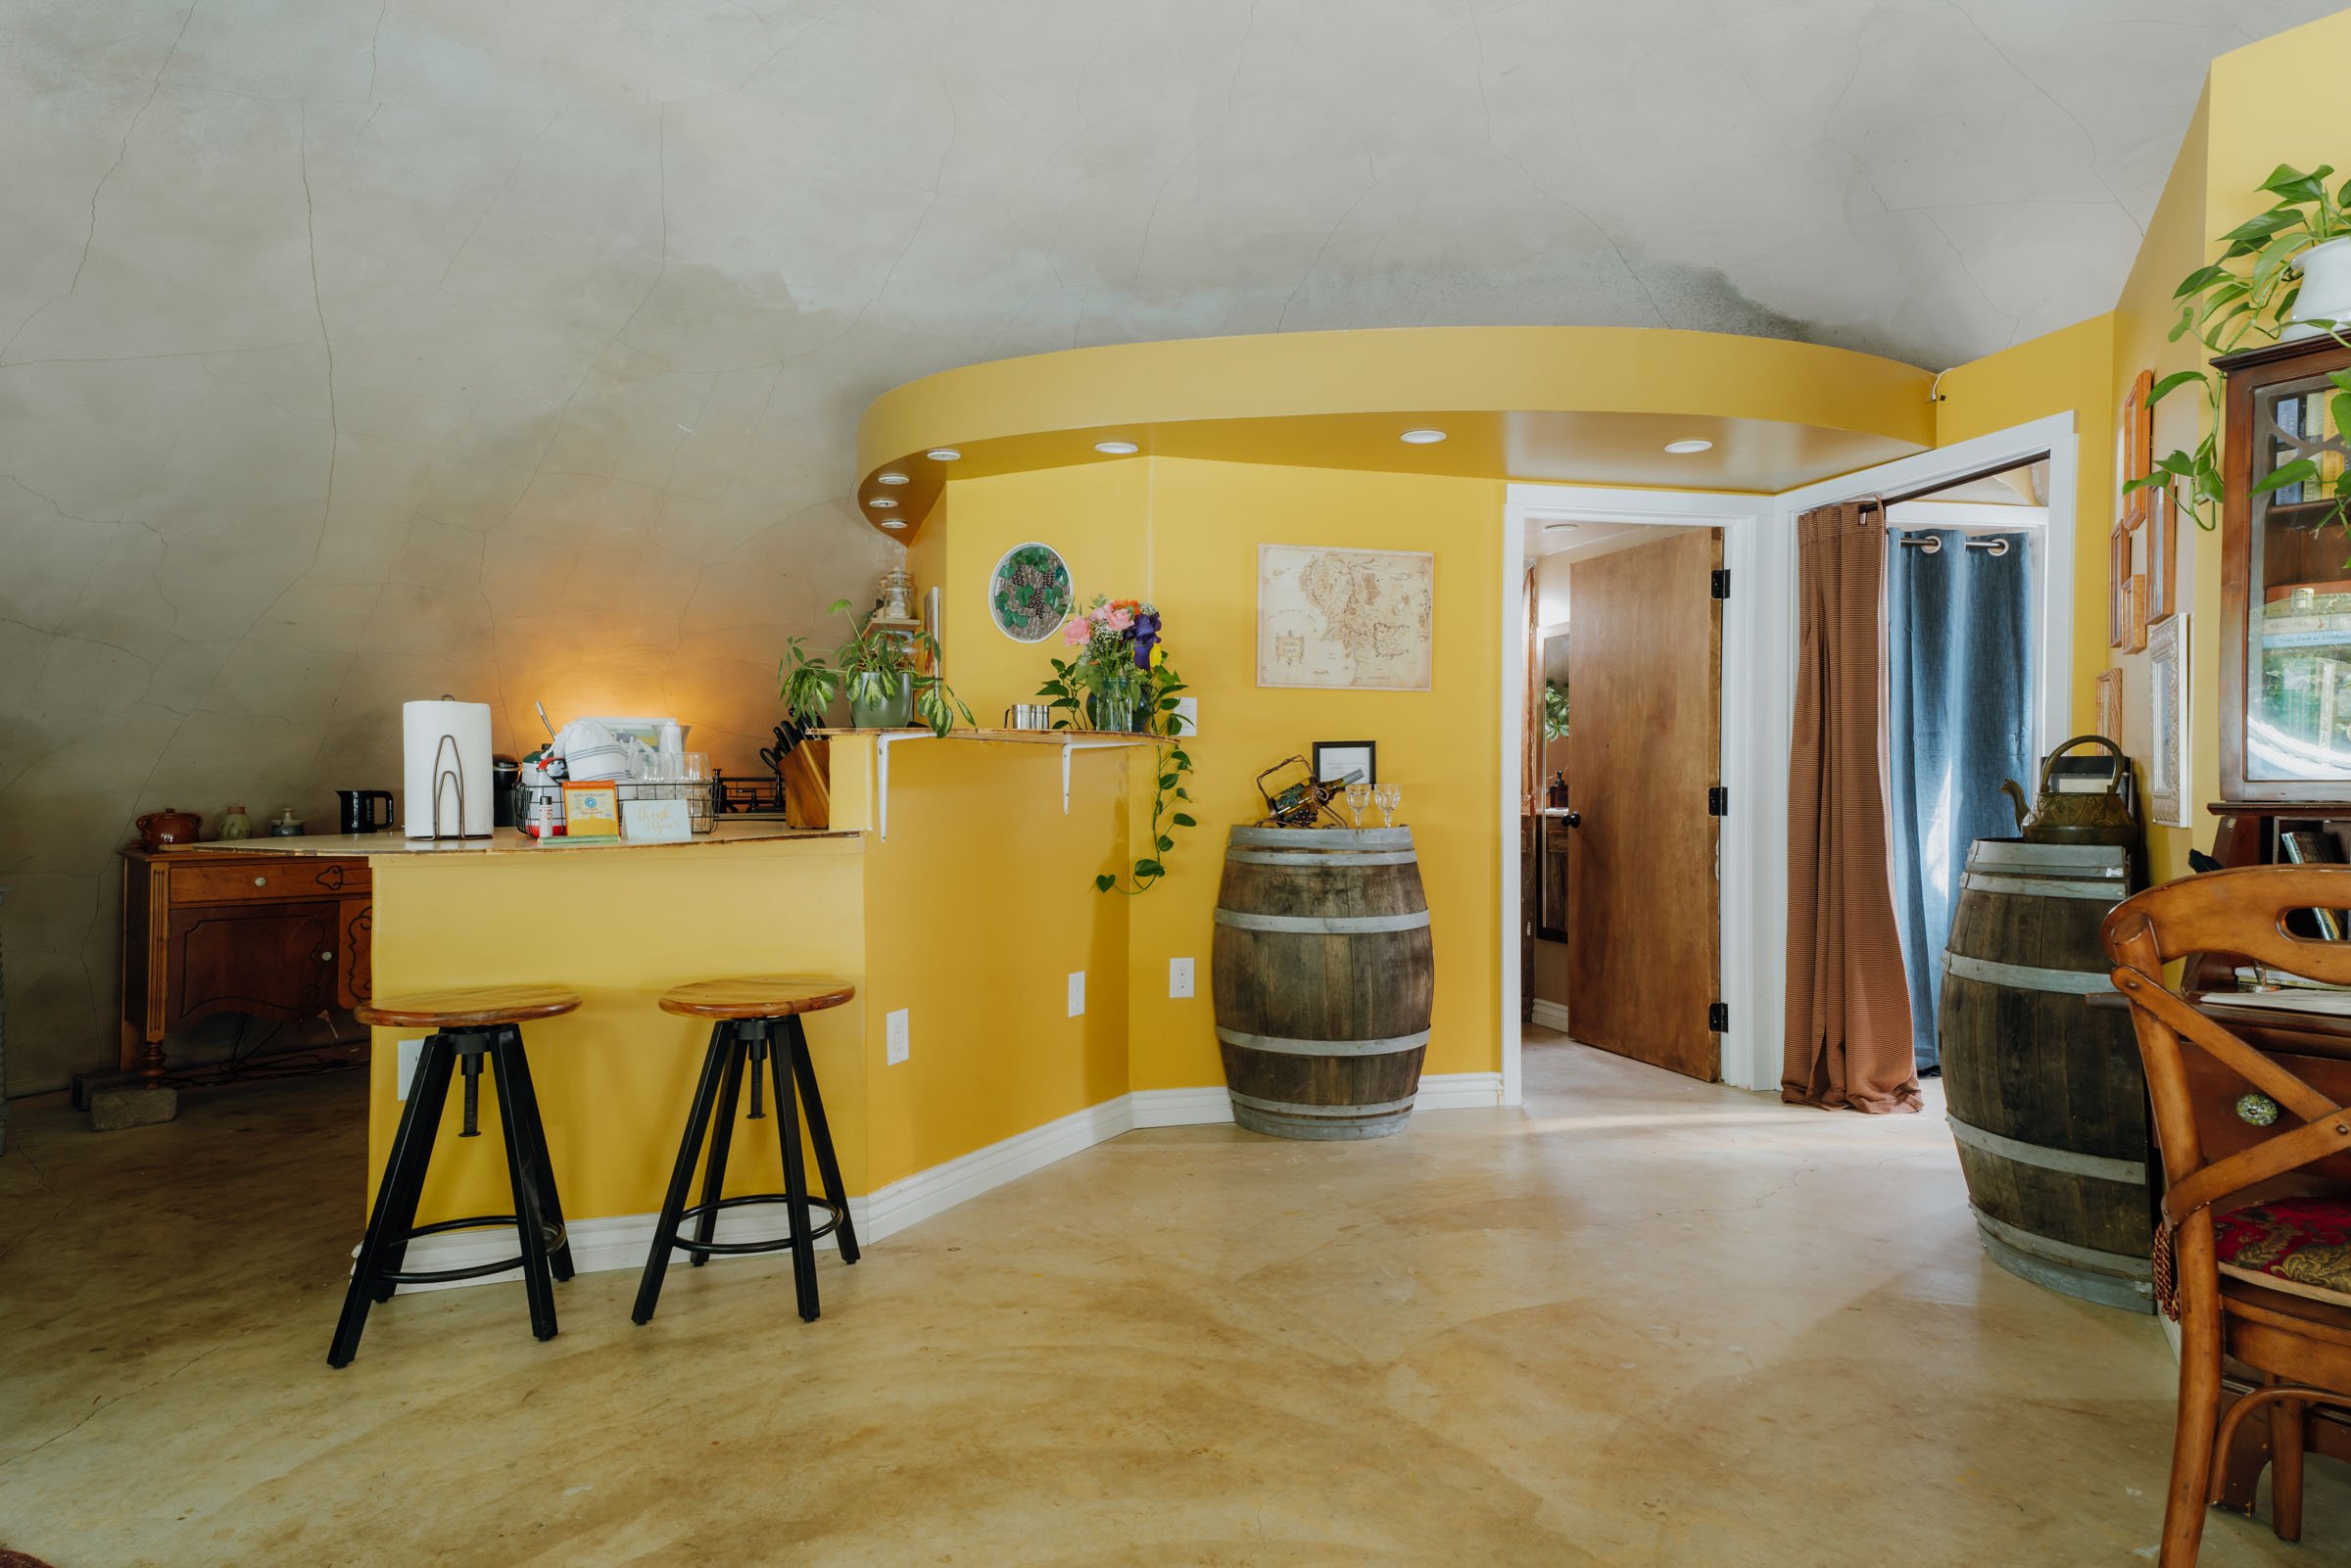 Unique Stay: This Eugene Dome home is an Airbnb in Oregon that should be on your must list!